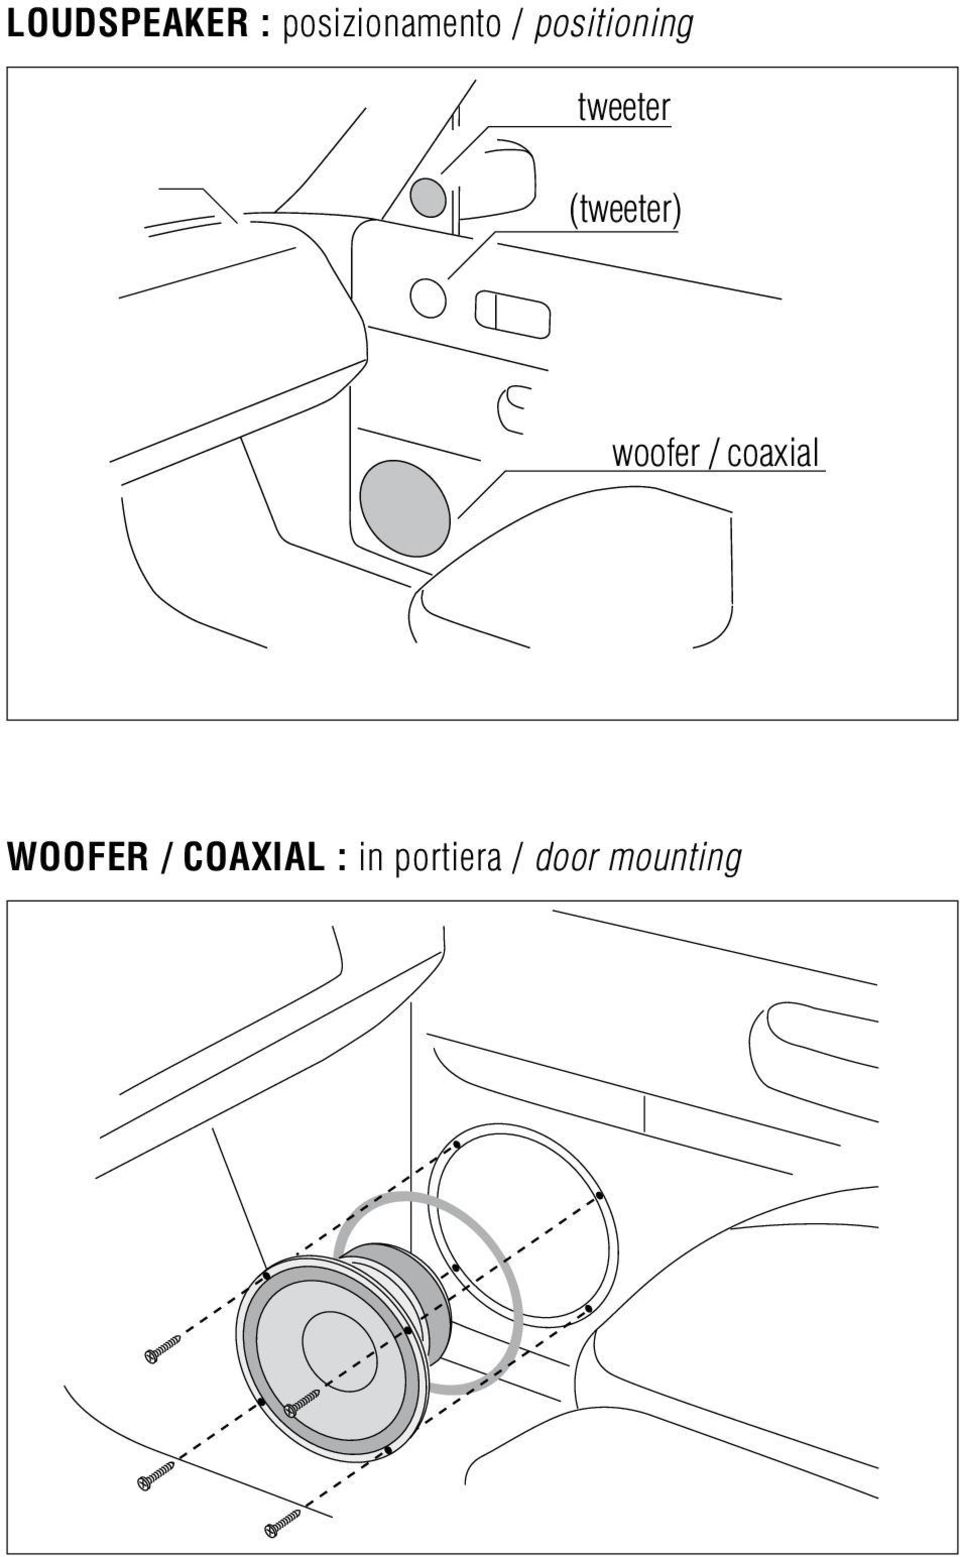 woofer / coaxial Woofer /